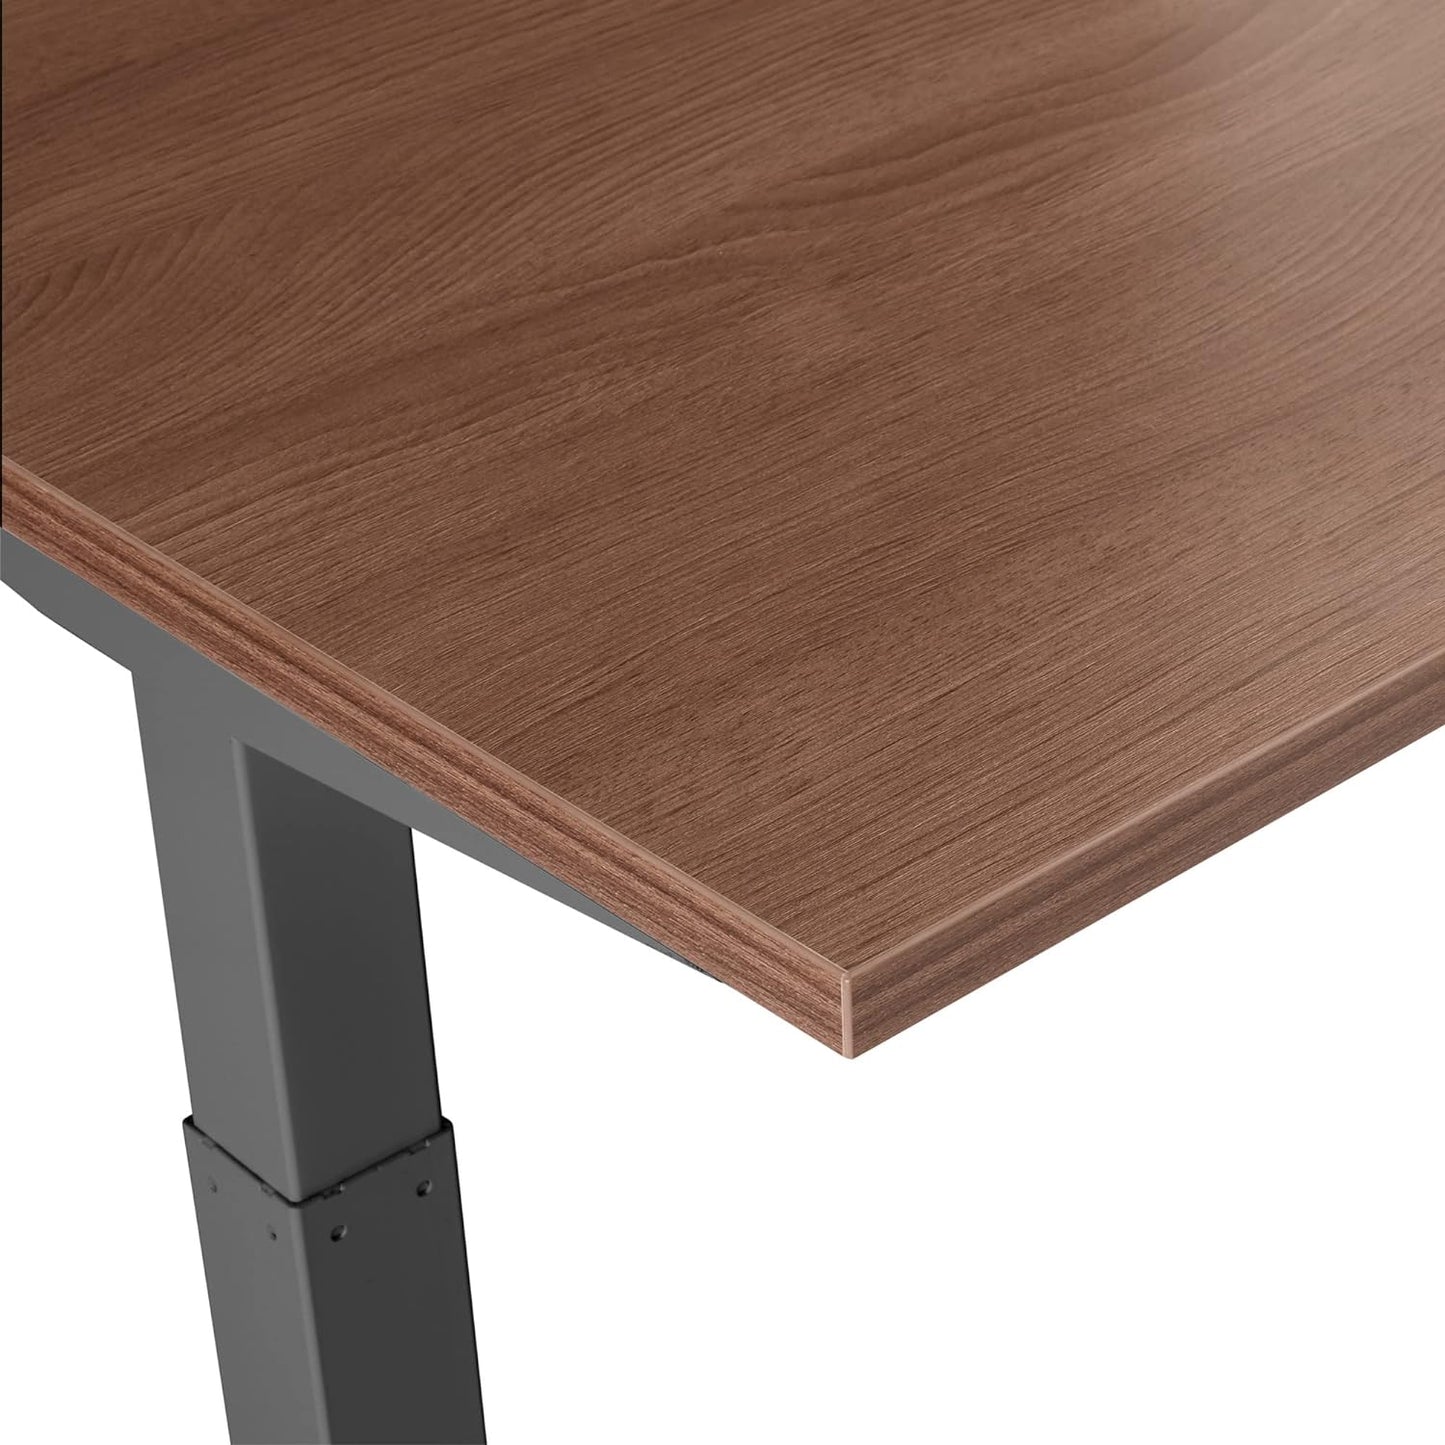 Series L Adjustable Height 47" Walnut Single Desk Modern Sit and Stand Solution with Charcoal Electric Legs Adjusting - LED Display with Four Memory Buttons